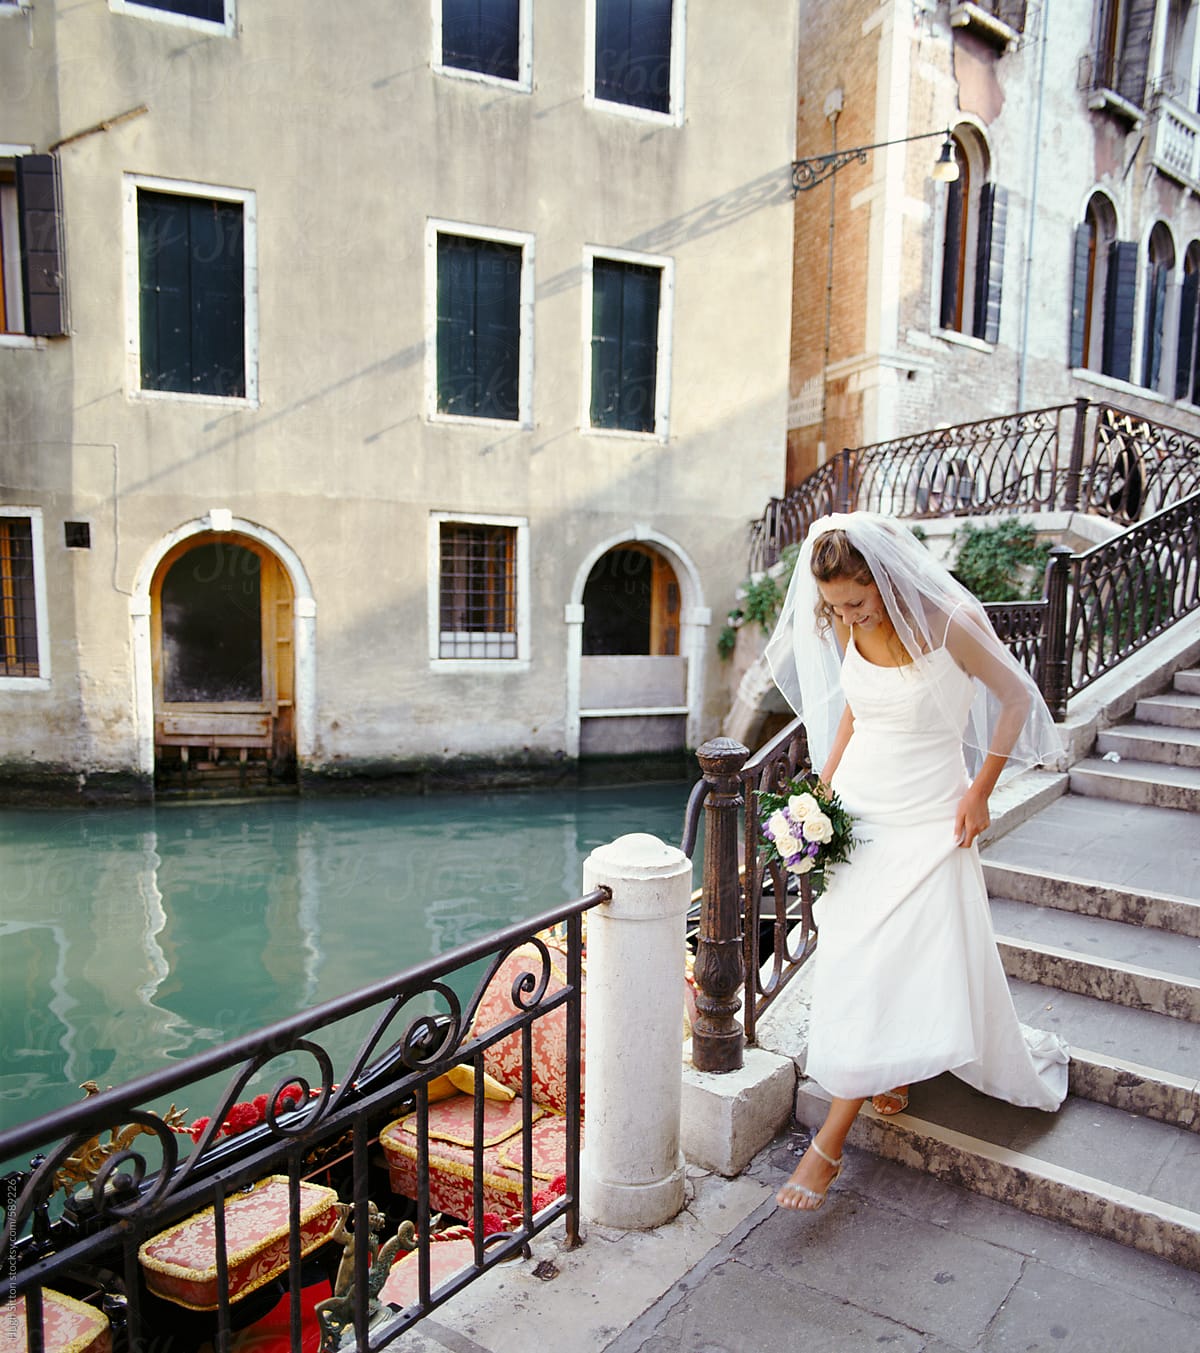 Bride hurrying down steps to her wedding. Venice. Italy.